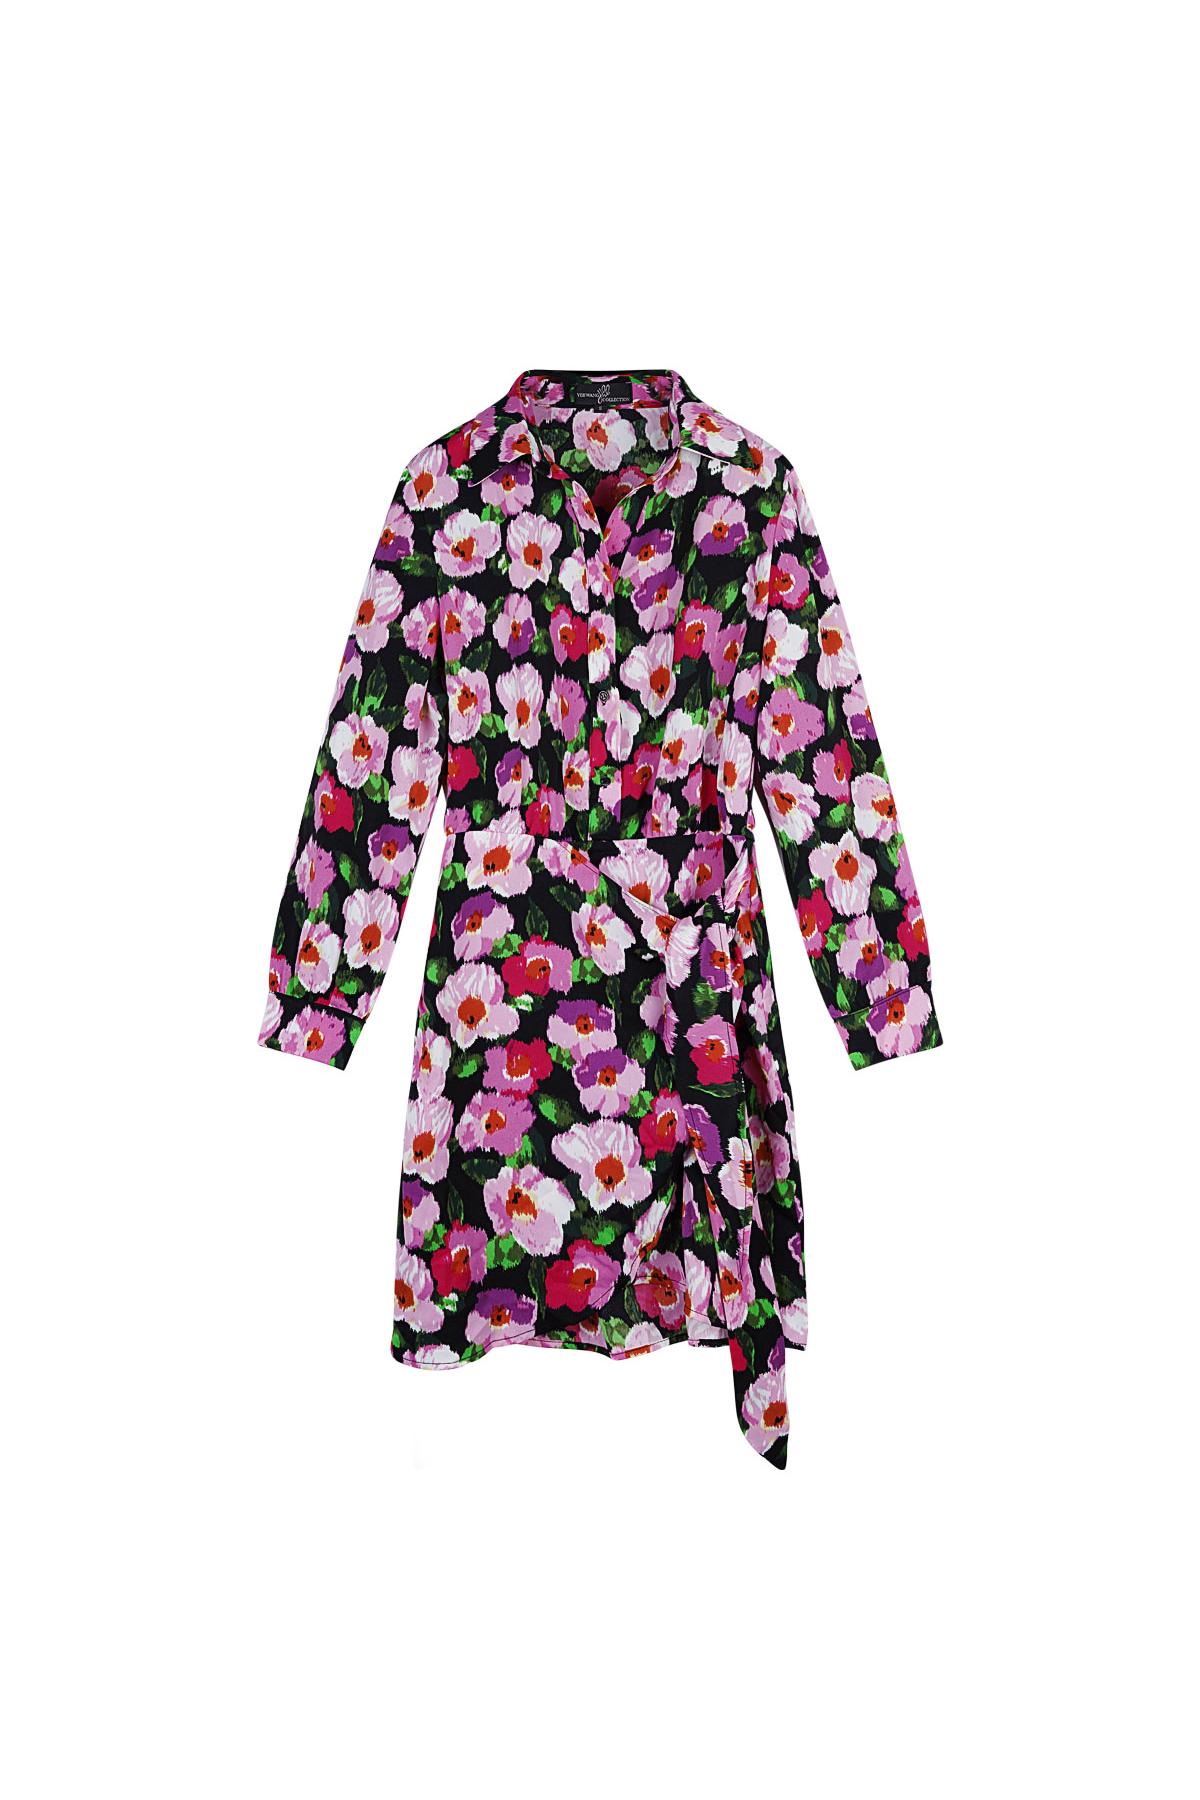 Flower print dress with button detail Black Multi S h5 